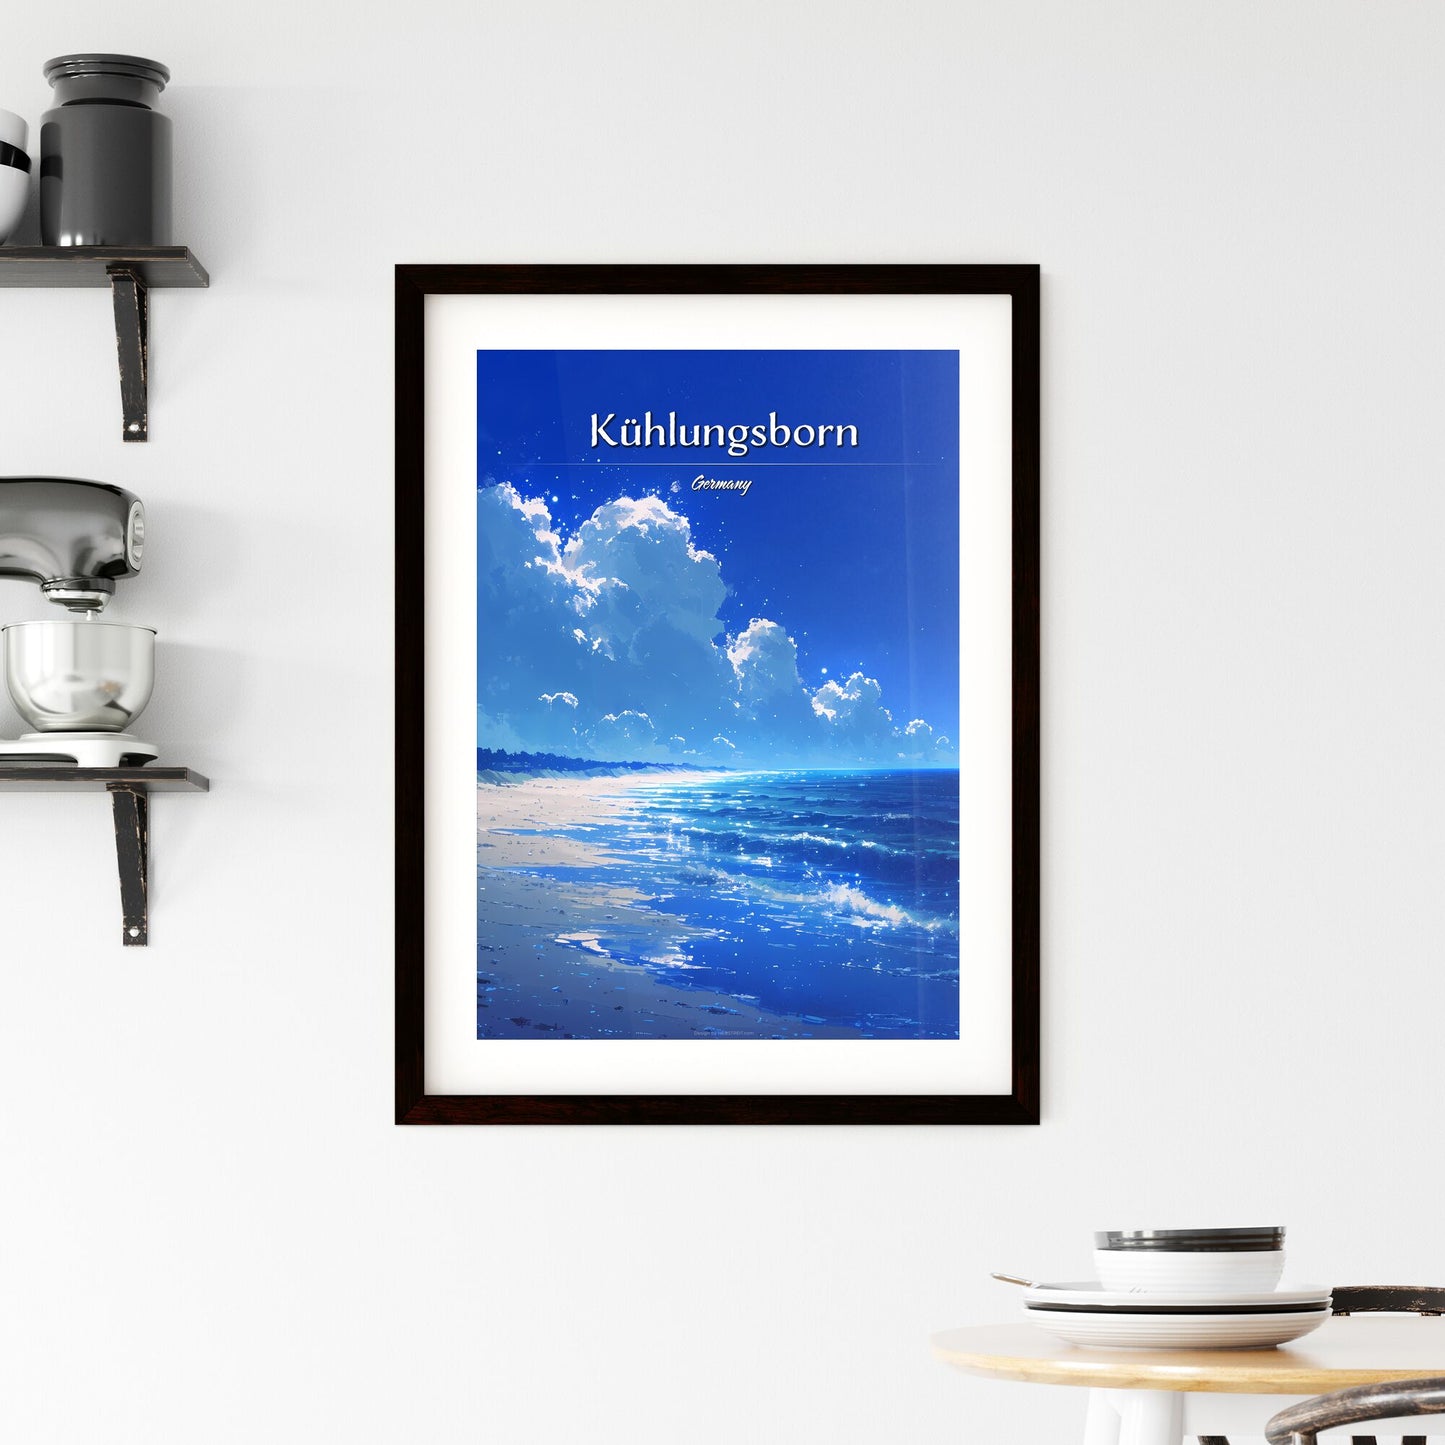 Kühlungsborn Beach, Germany (Baltic Sea) - Art print of a beach with waves and clouds Default Title